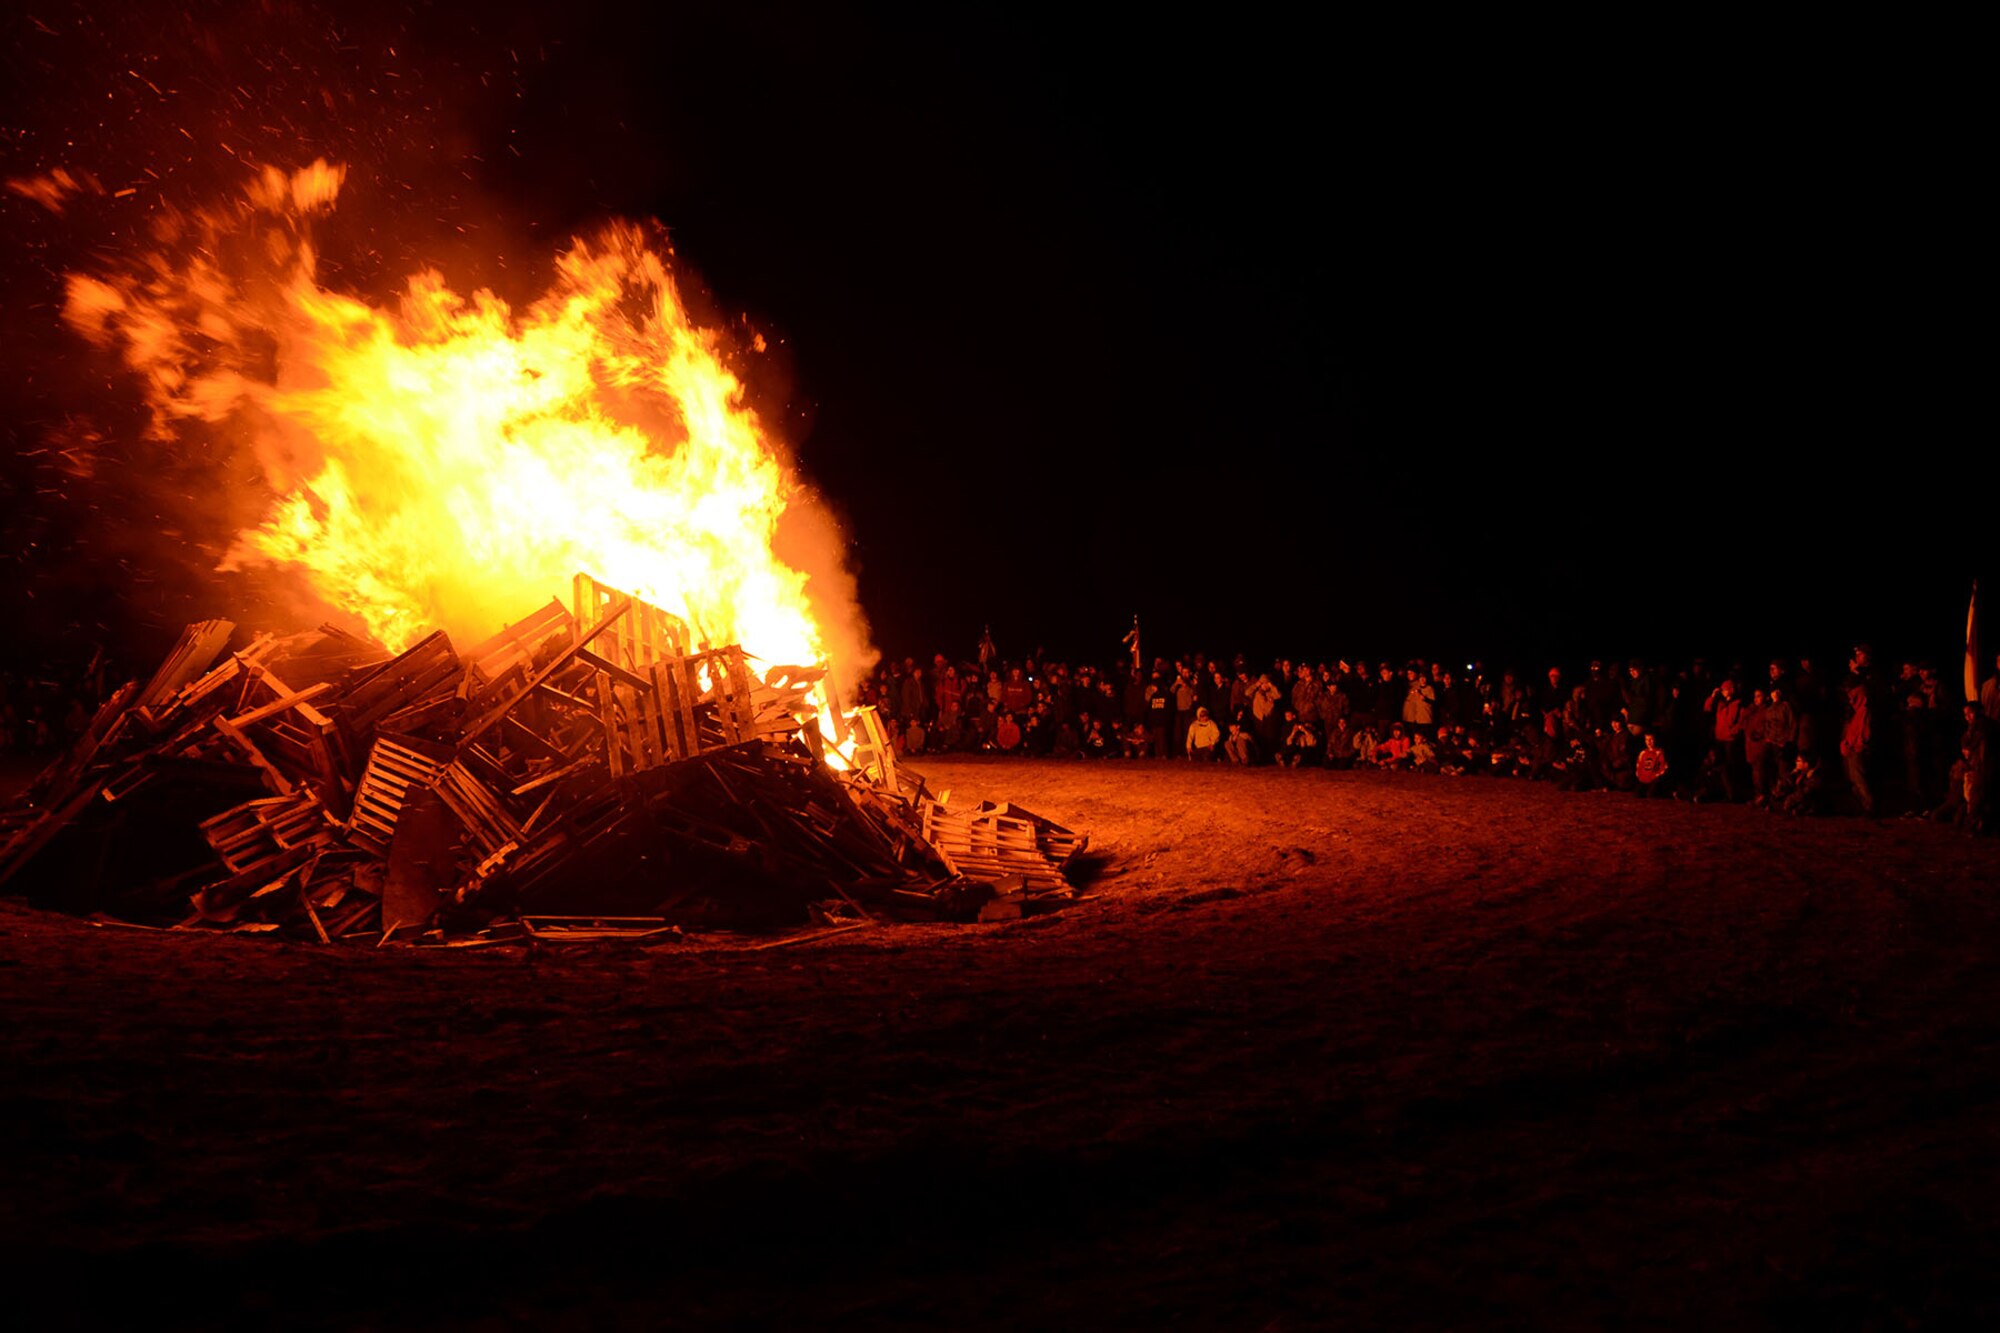 Boy Scout troops view the bonfire at McEntire Joint National Guard Base, S.C., during the Swamp Fox Camporee Dec. 6, 2015. The event was hosted by the South Carolina National Guard to allow Cub Scouts and Boy Scouts the opportunity to interact with Guardsmen and compete to earn various merit badges. (U.S. Air National Guard photo by Airman Megan Floyd/RELEASED)